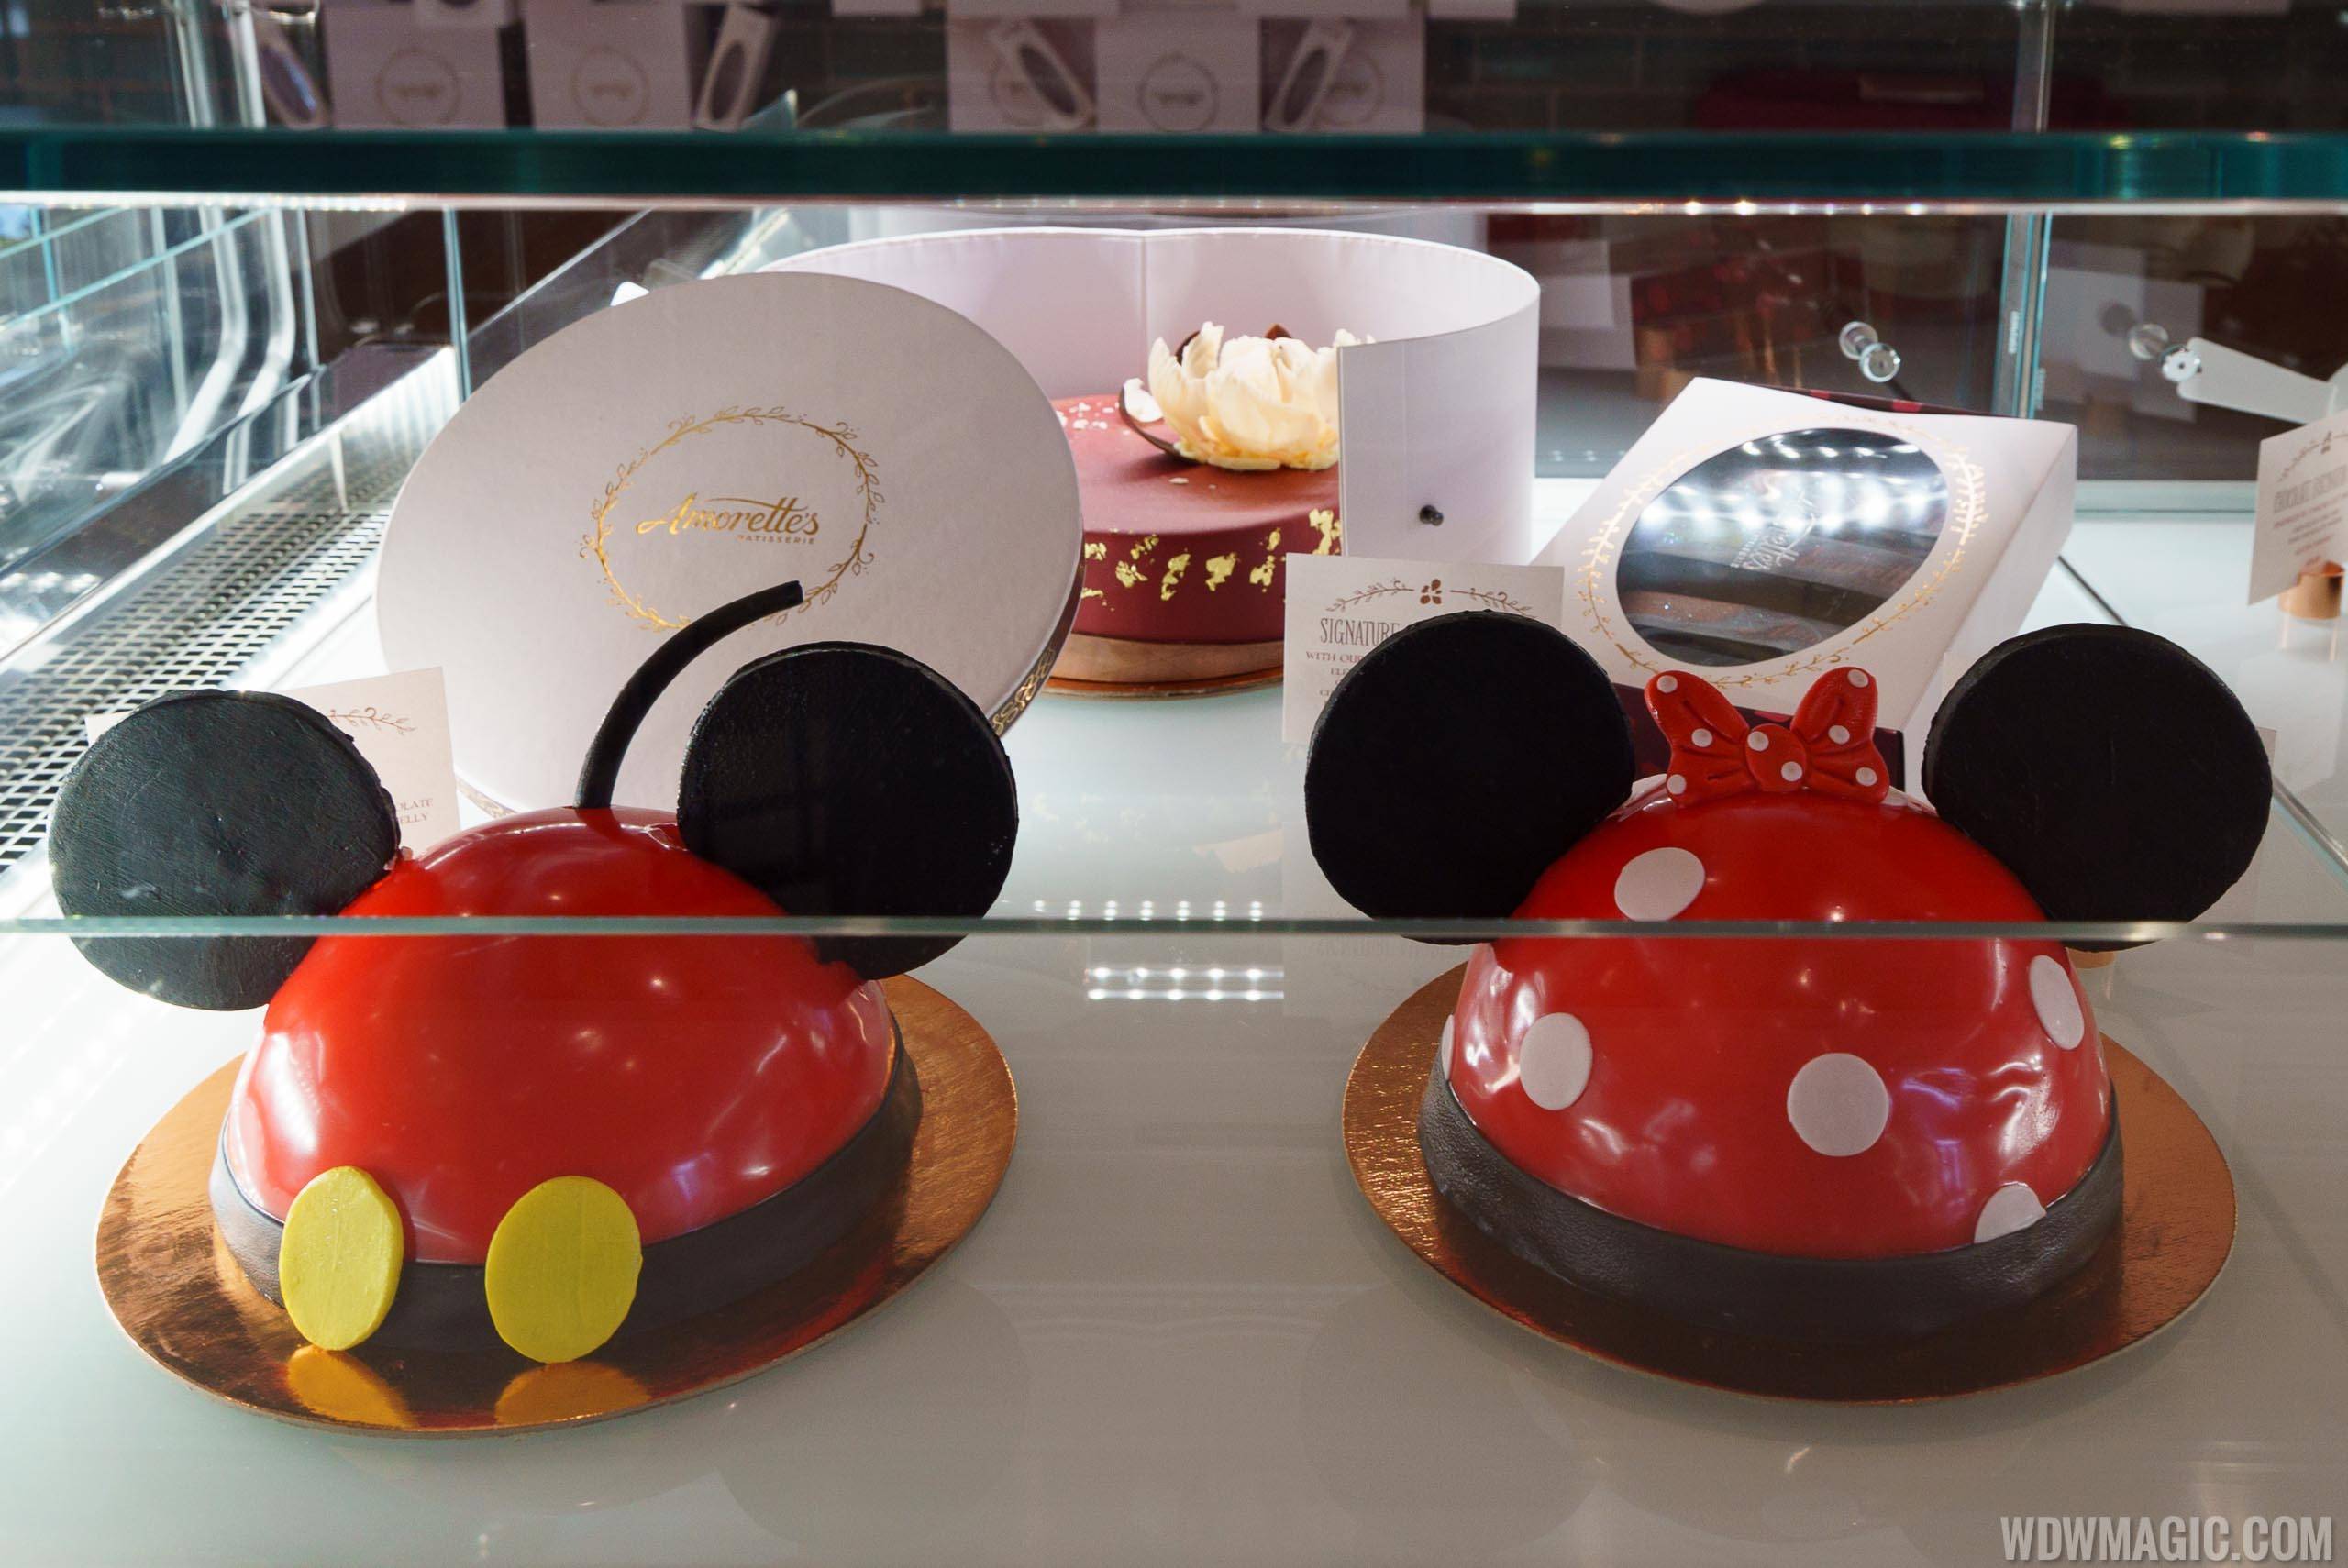 Amorette's Patisserie - Mickey and Minnie Dome Cakes